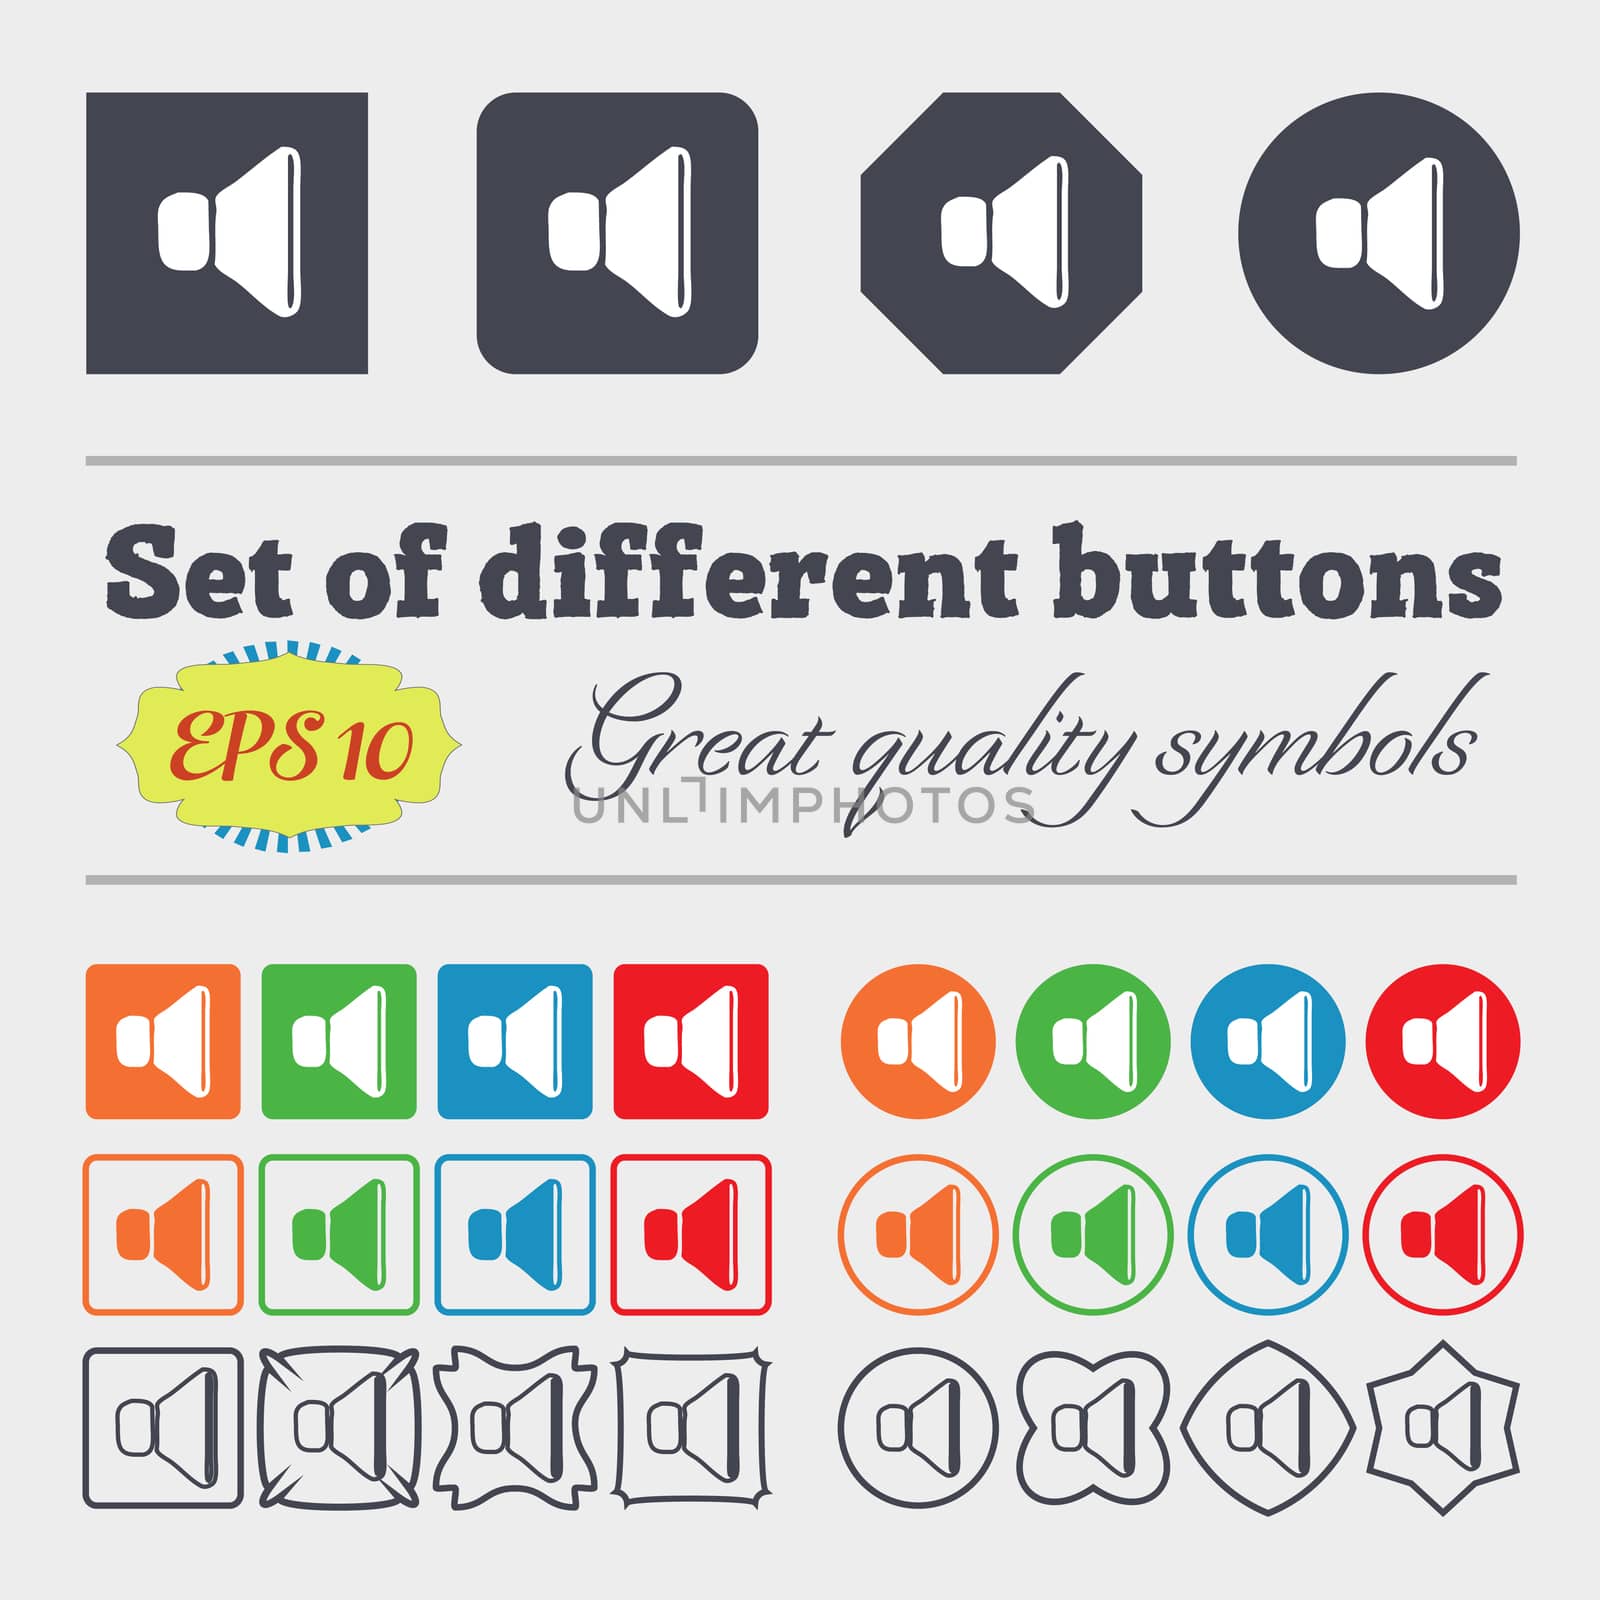 volume, sound icon sign. Big set of colorful, diverse, high-quality buttons. illustration